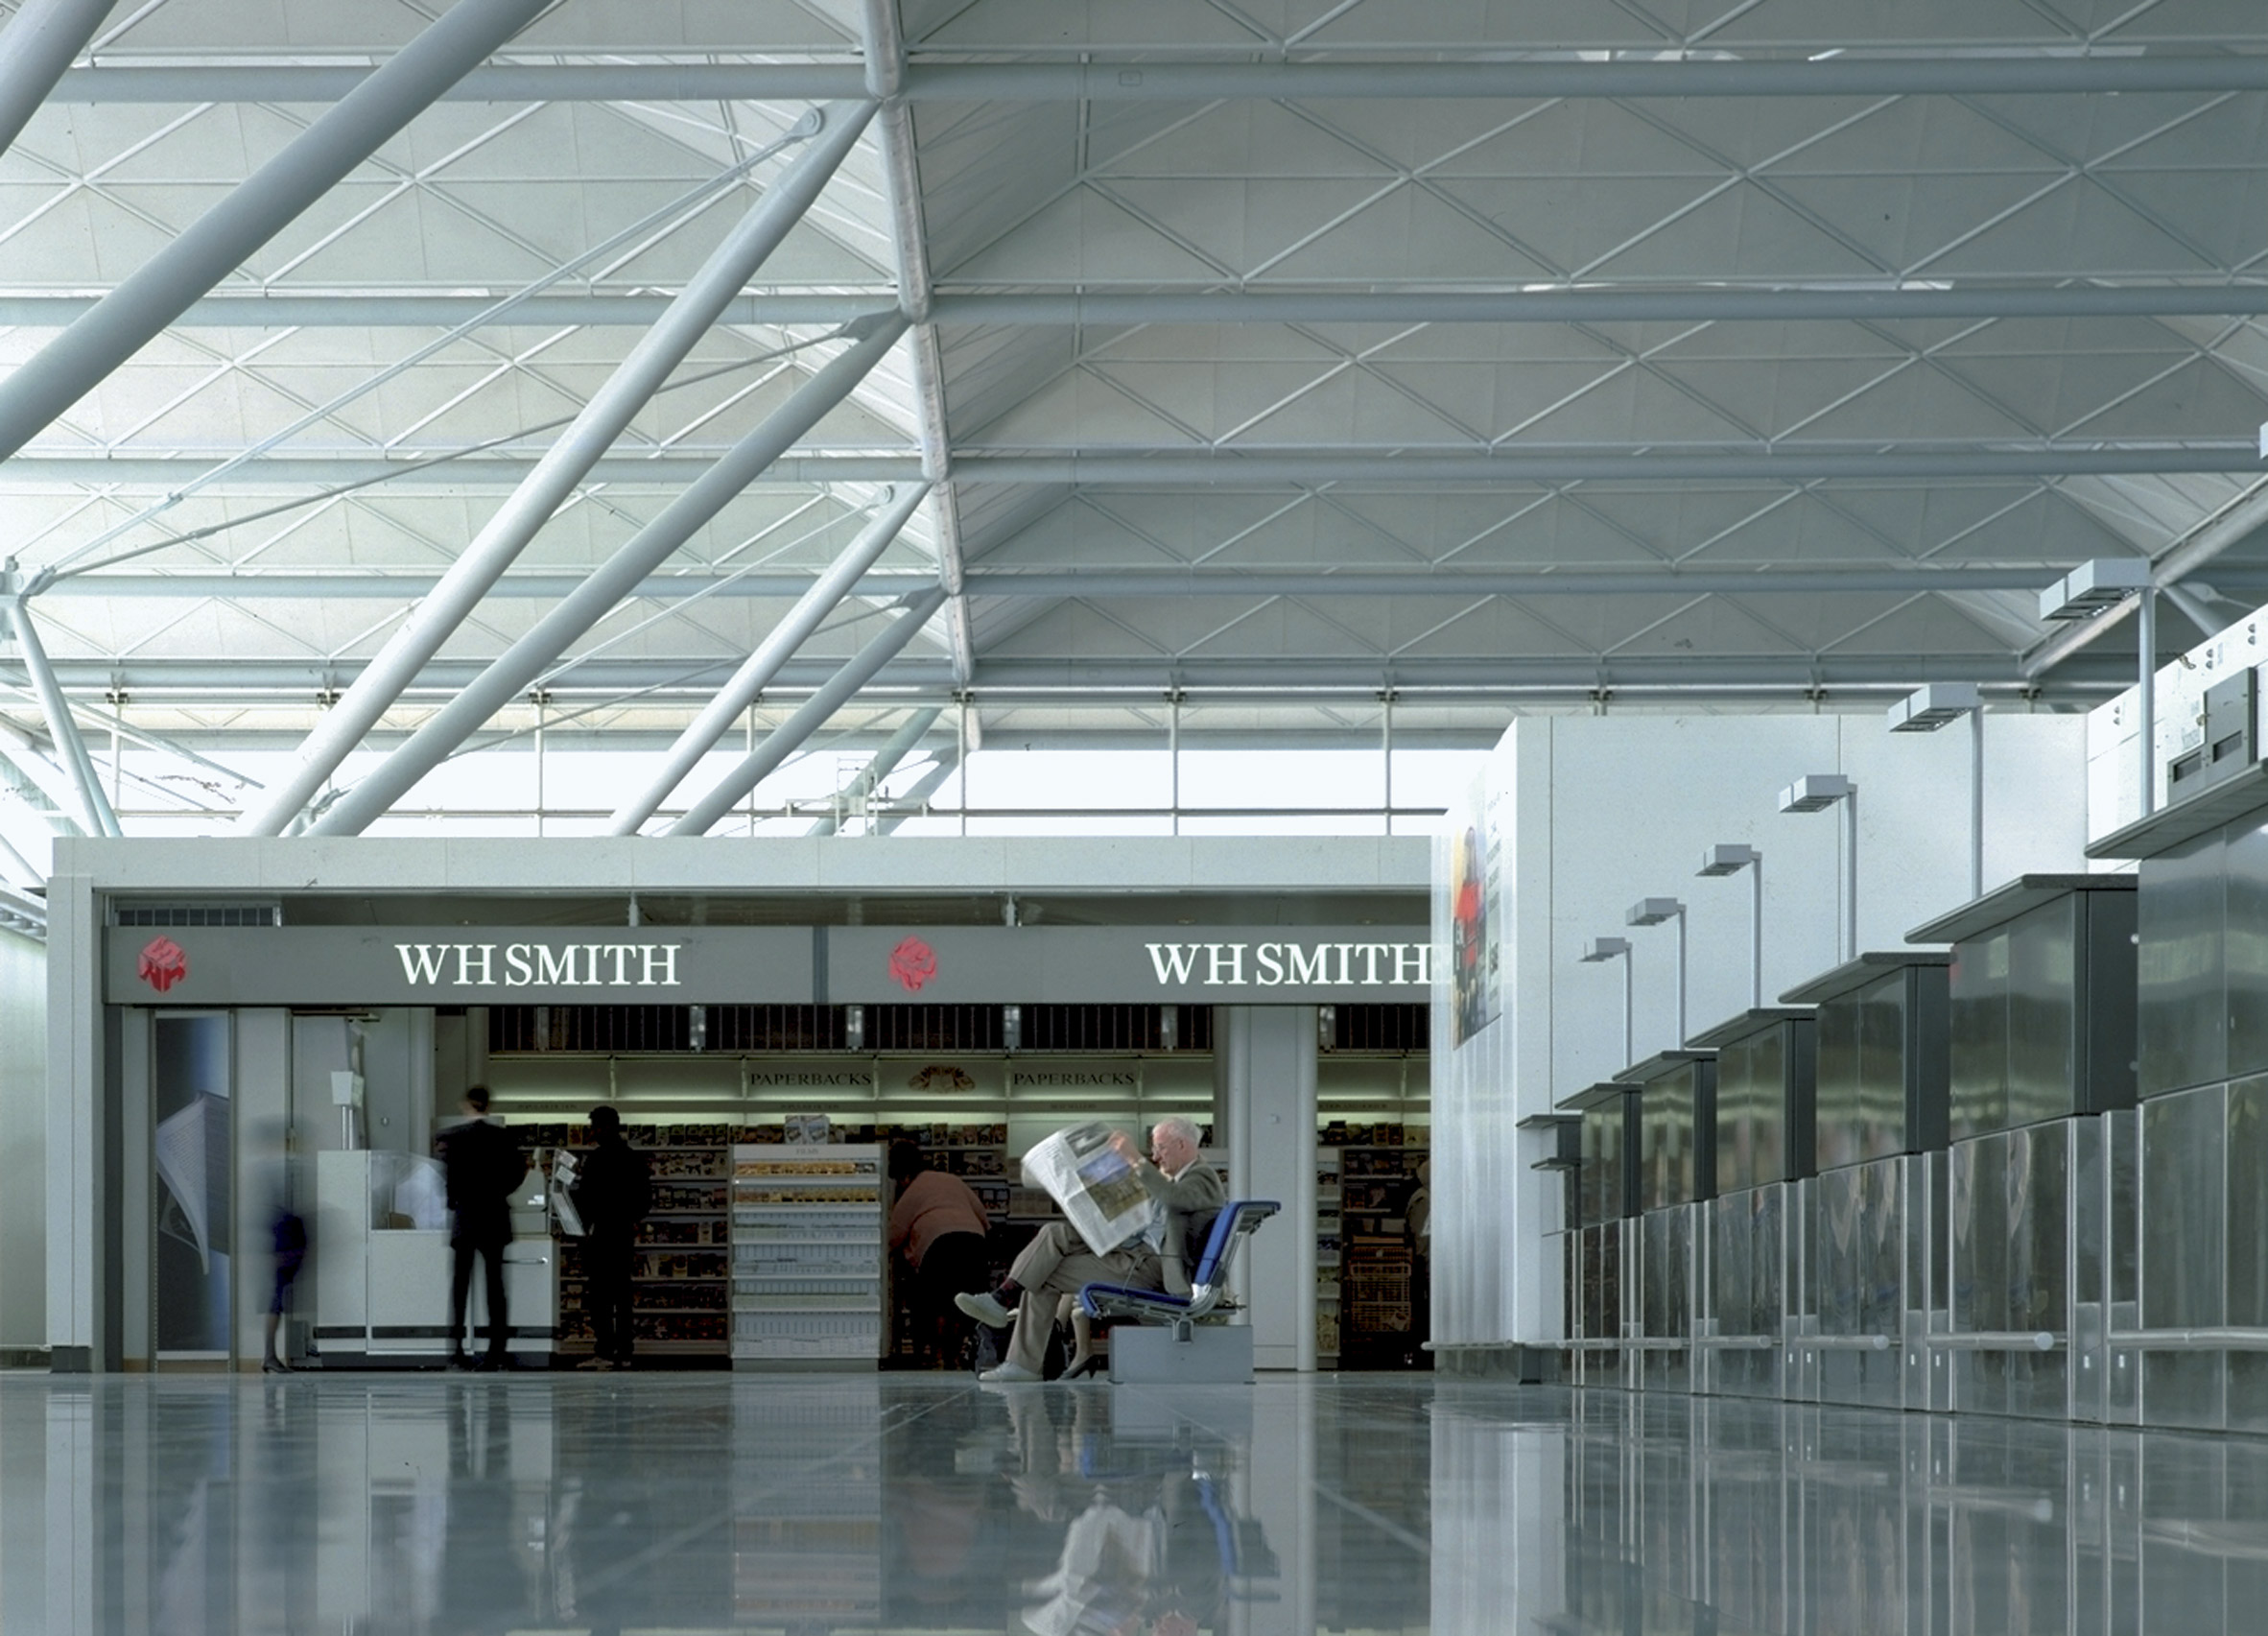 Stansted Airport by Foster + Partners